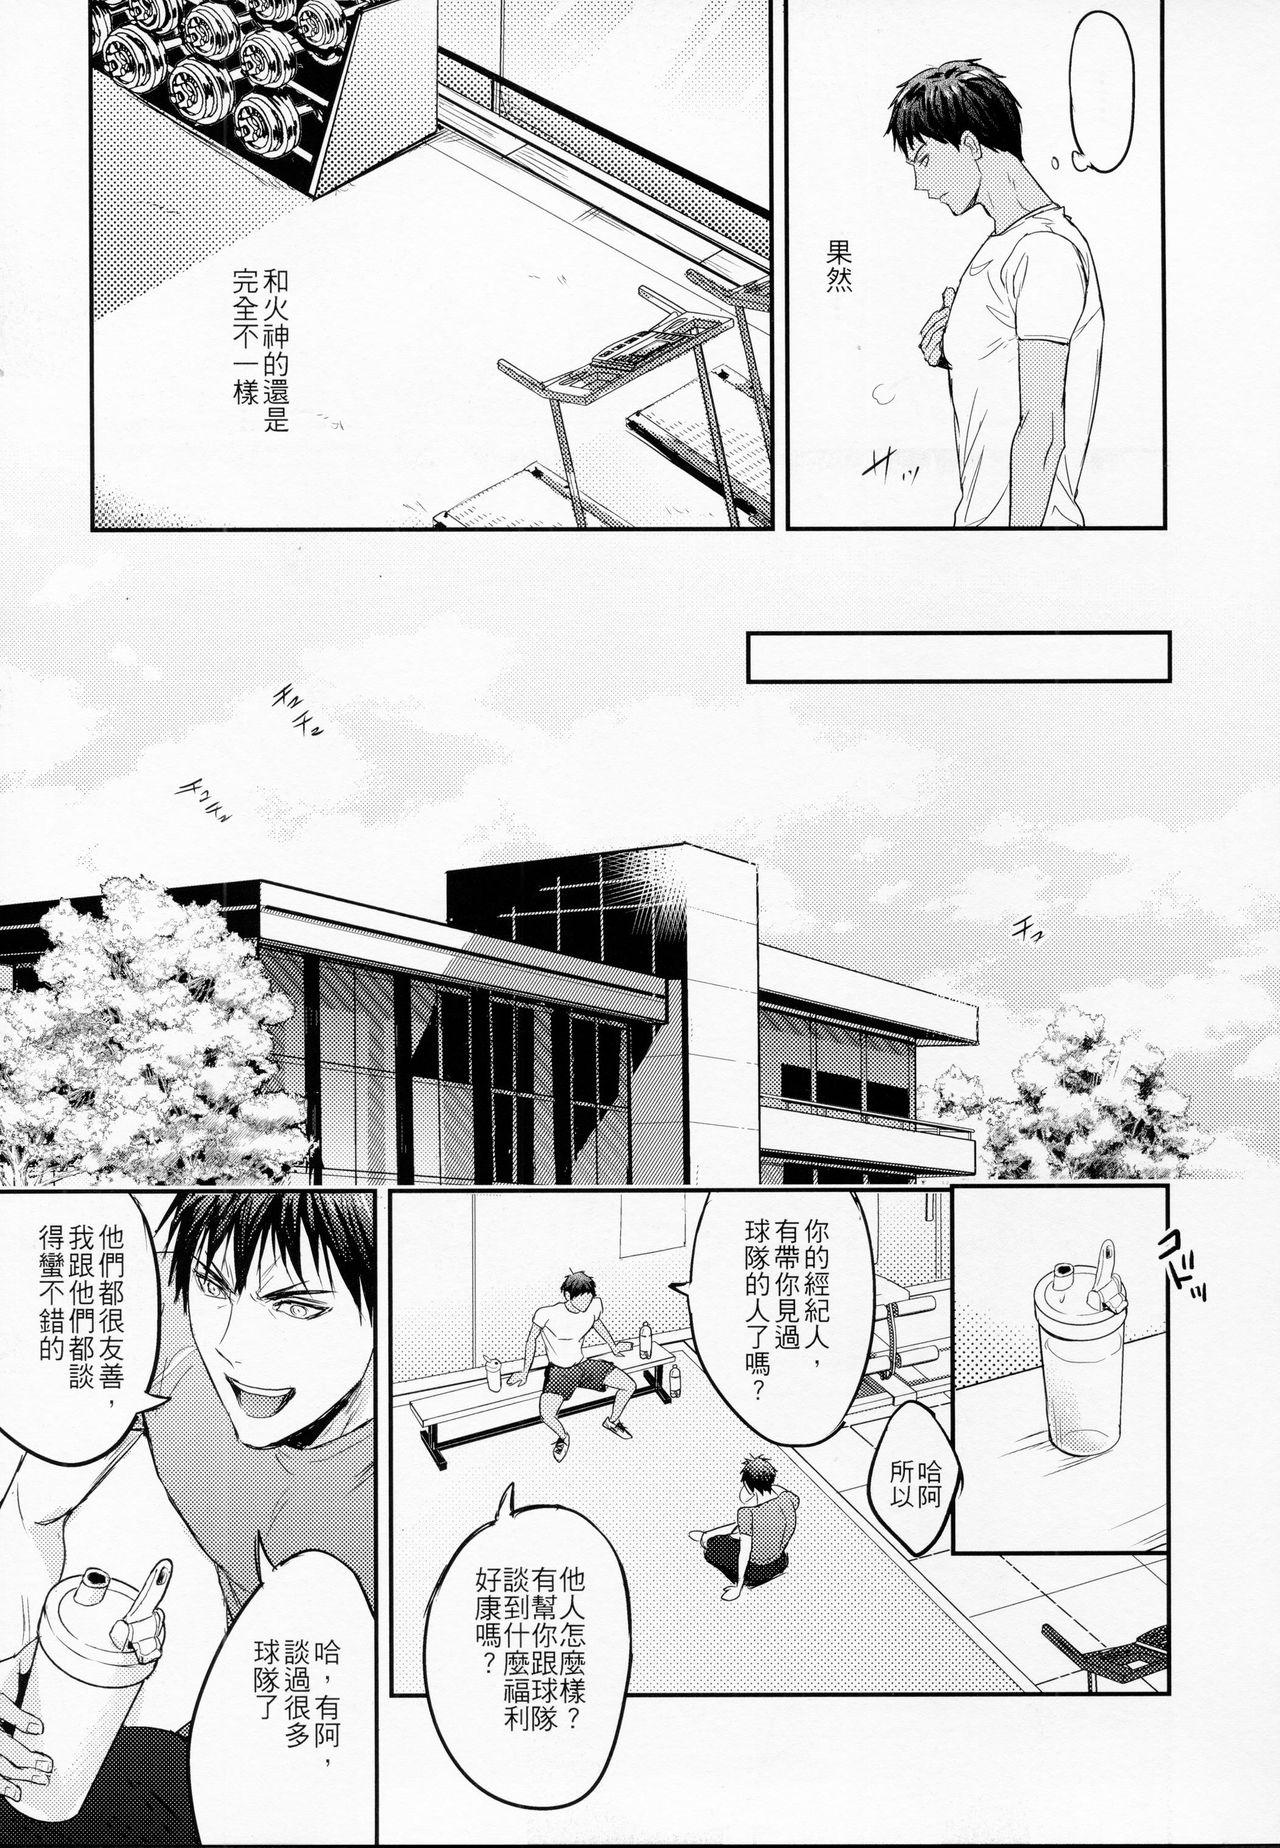 Dirty Talk This is how we WORK IT OUT - Kuroko no basuke Piercings - Page 6